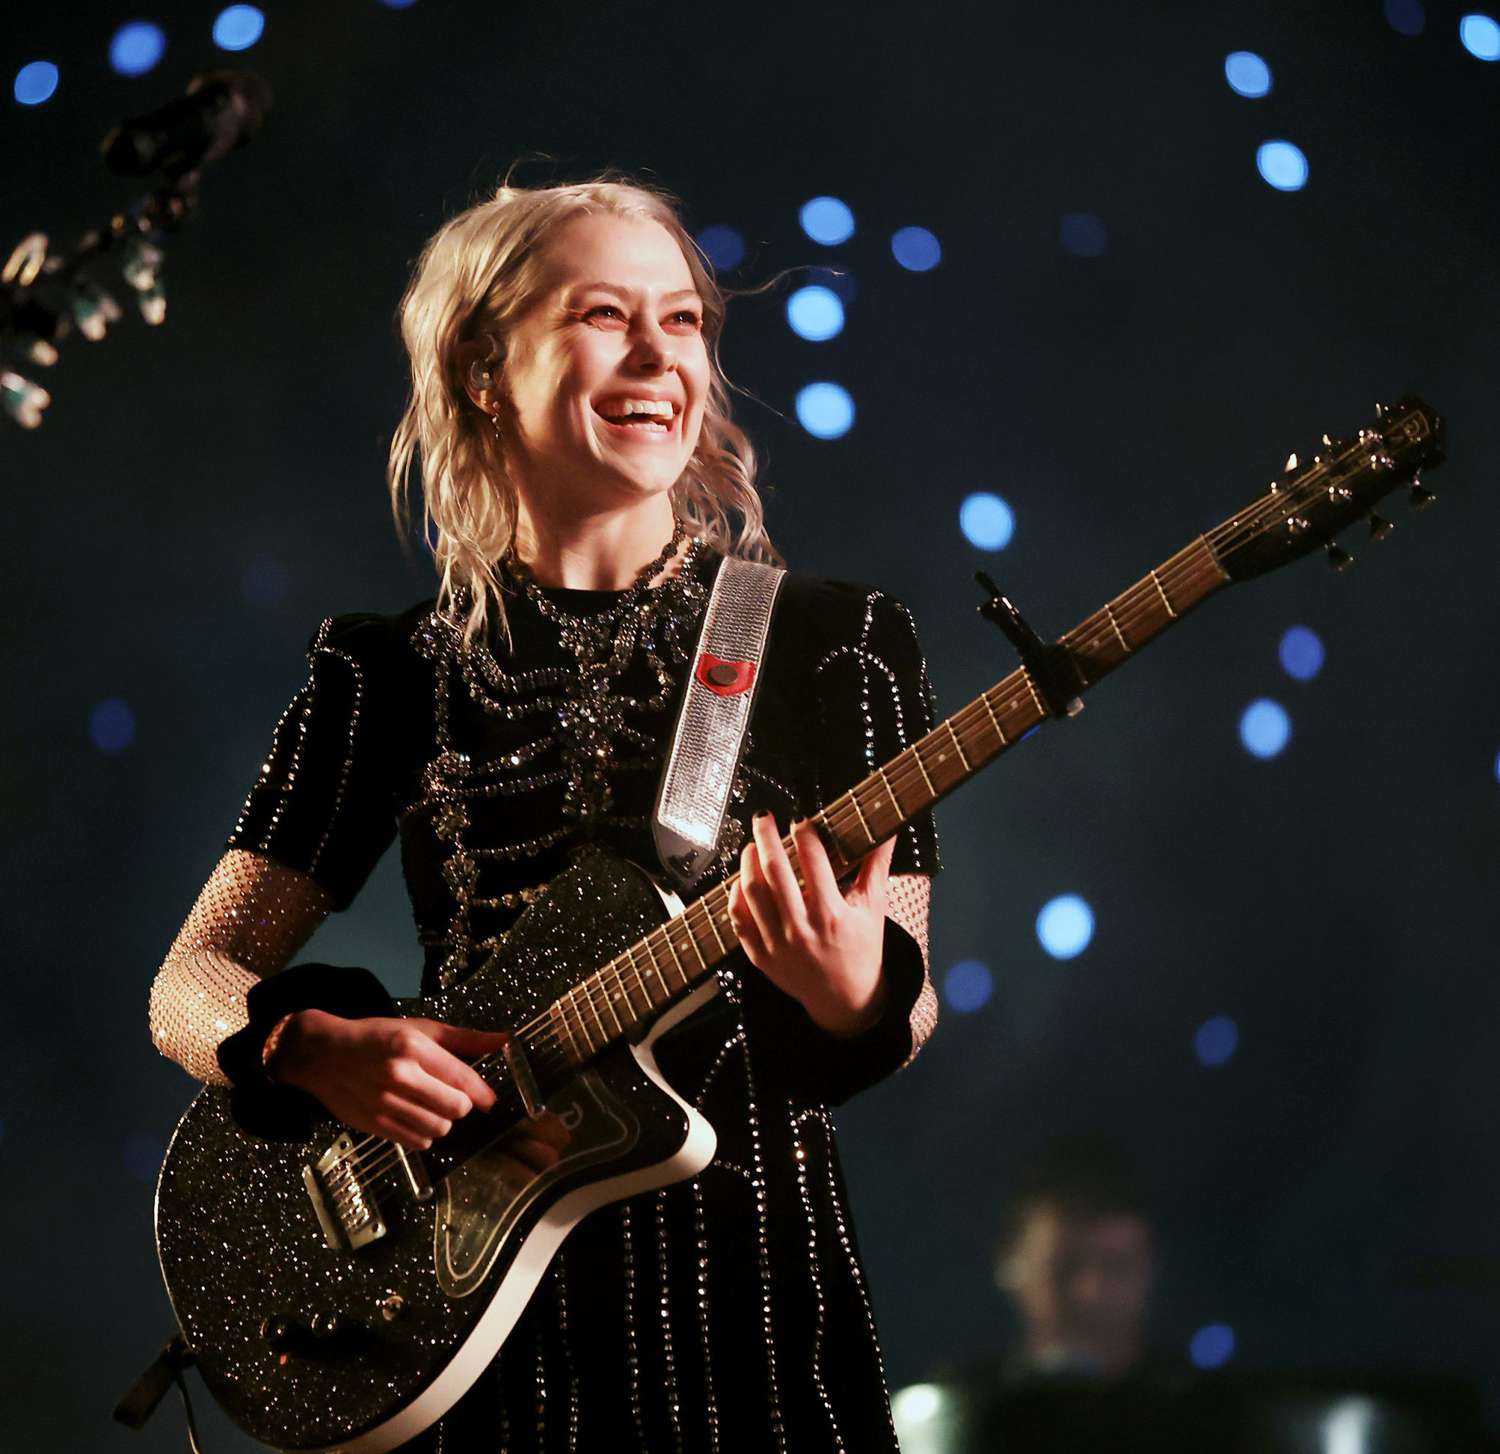 INDIO, CALIFORNIA - APRIL 15: Phoebe Bridgers performs onstage at the Outdoor Theatre during the 2022 Coachella Valley Music And Arts Festival on April 15, 2022 in Indio, California. (Photo by Frazer Harrison/Getty Images for Coachella)